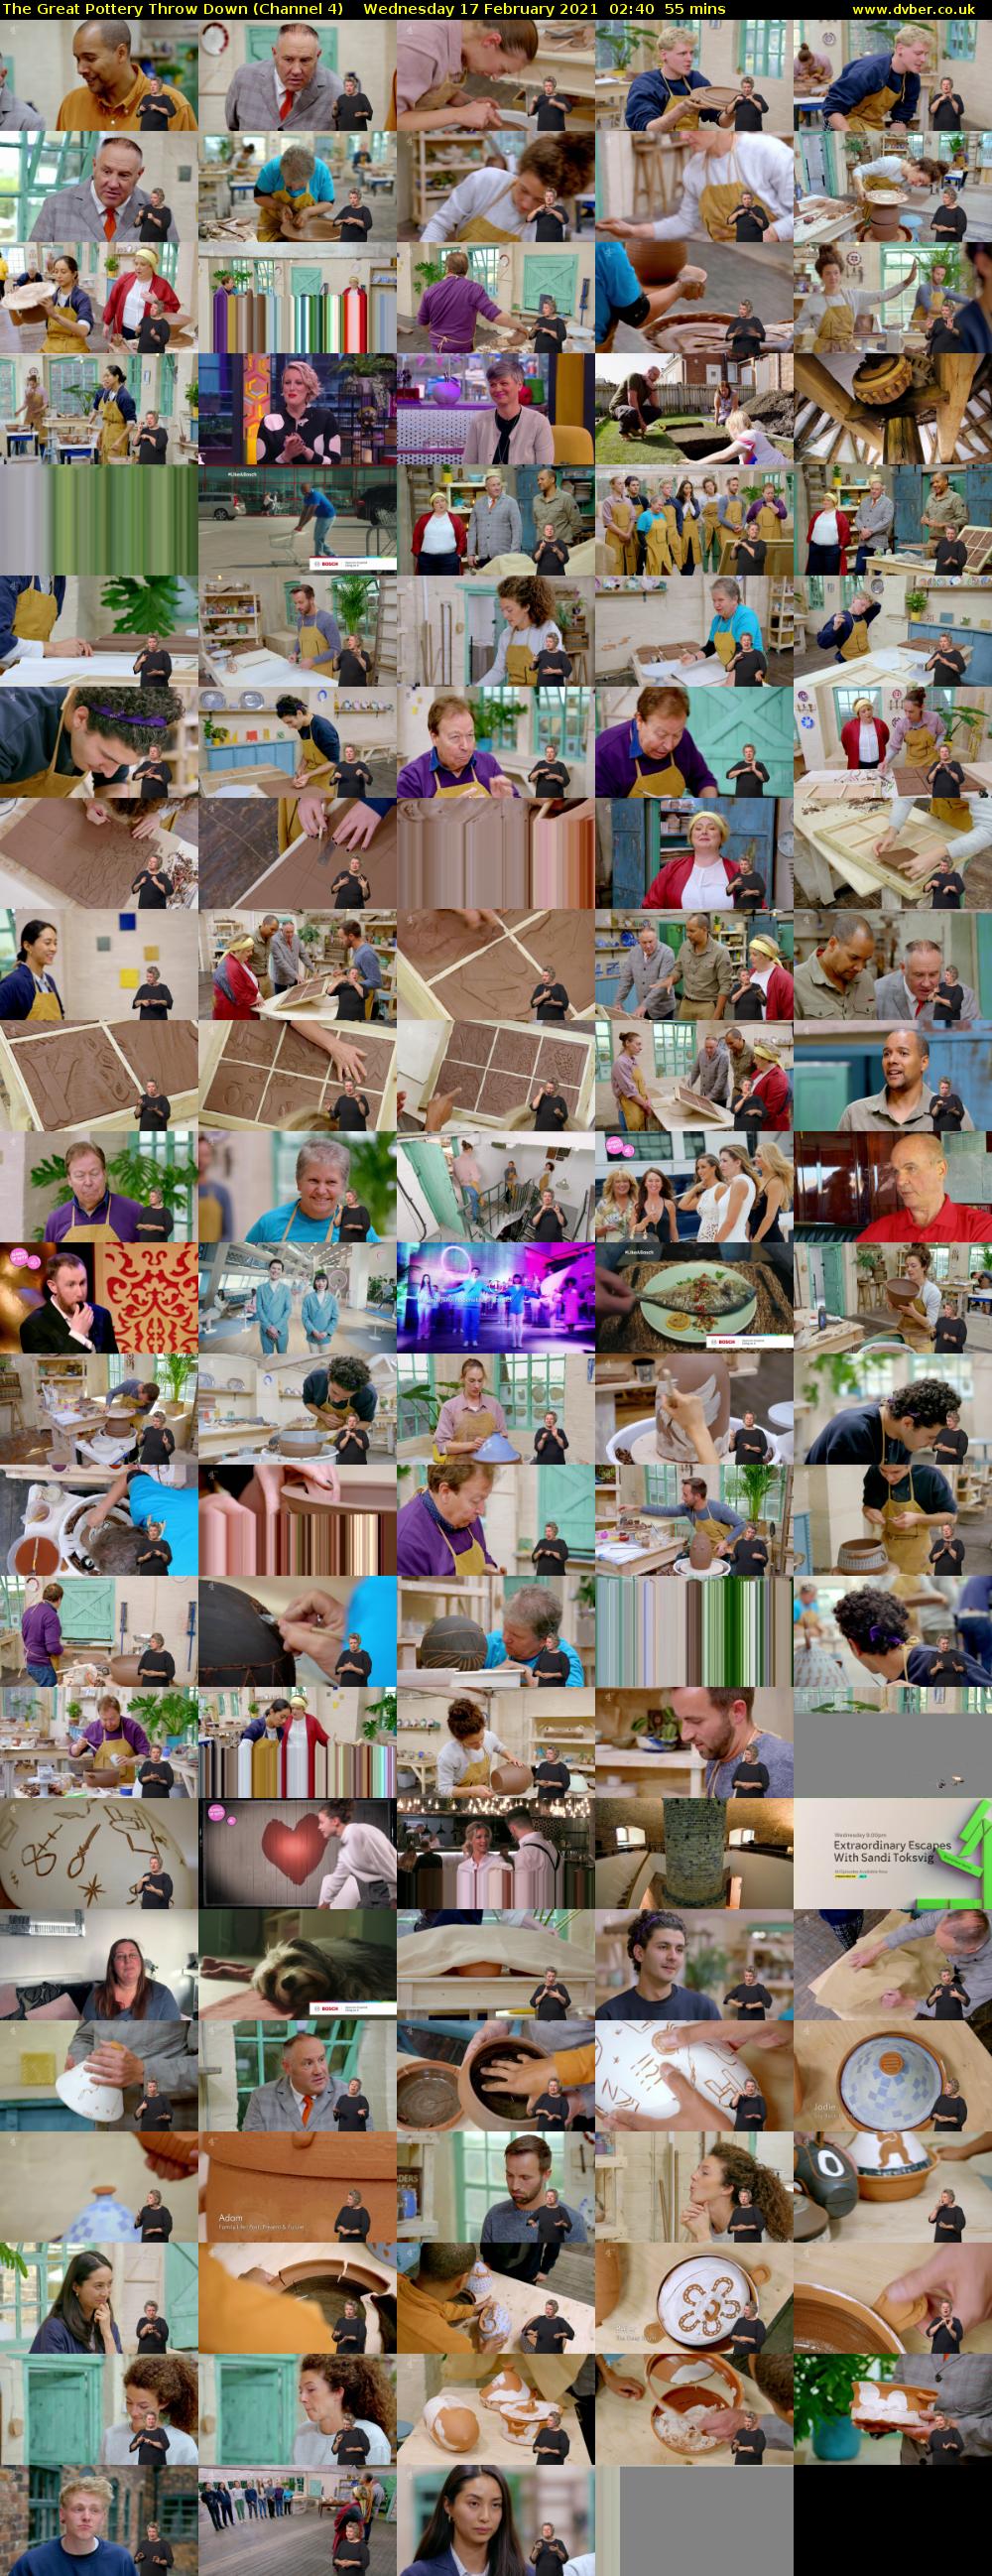 The Great Pottery Throw Down (Channel 4) Wednesday 17 February 2021 02:40 - 03:35